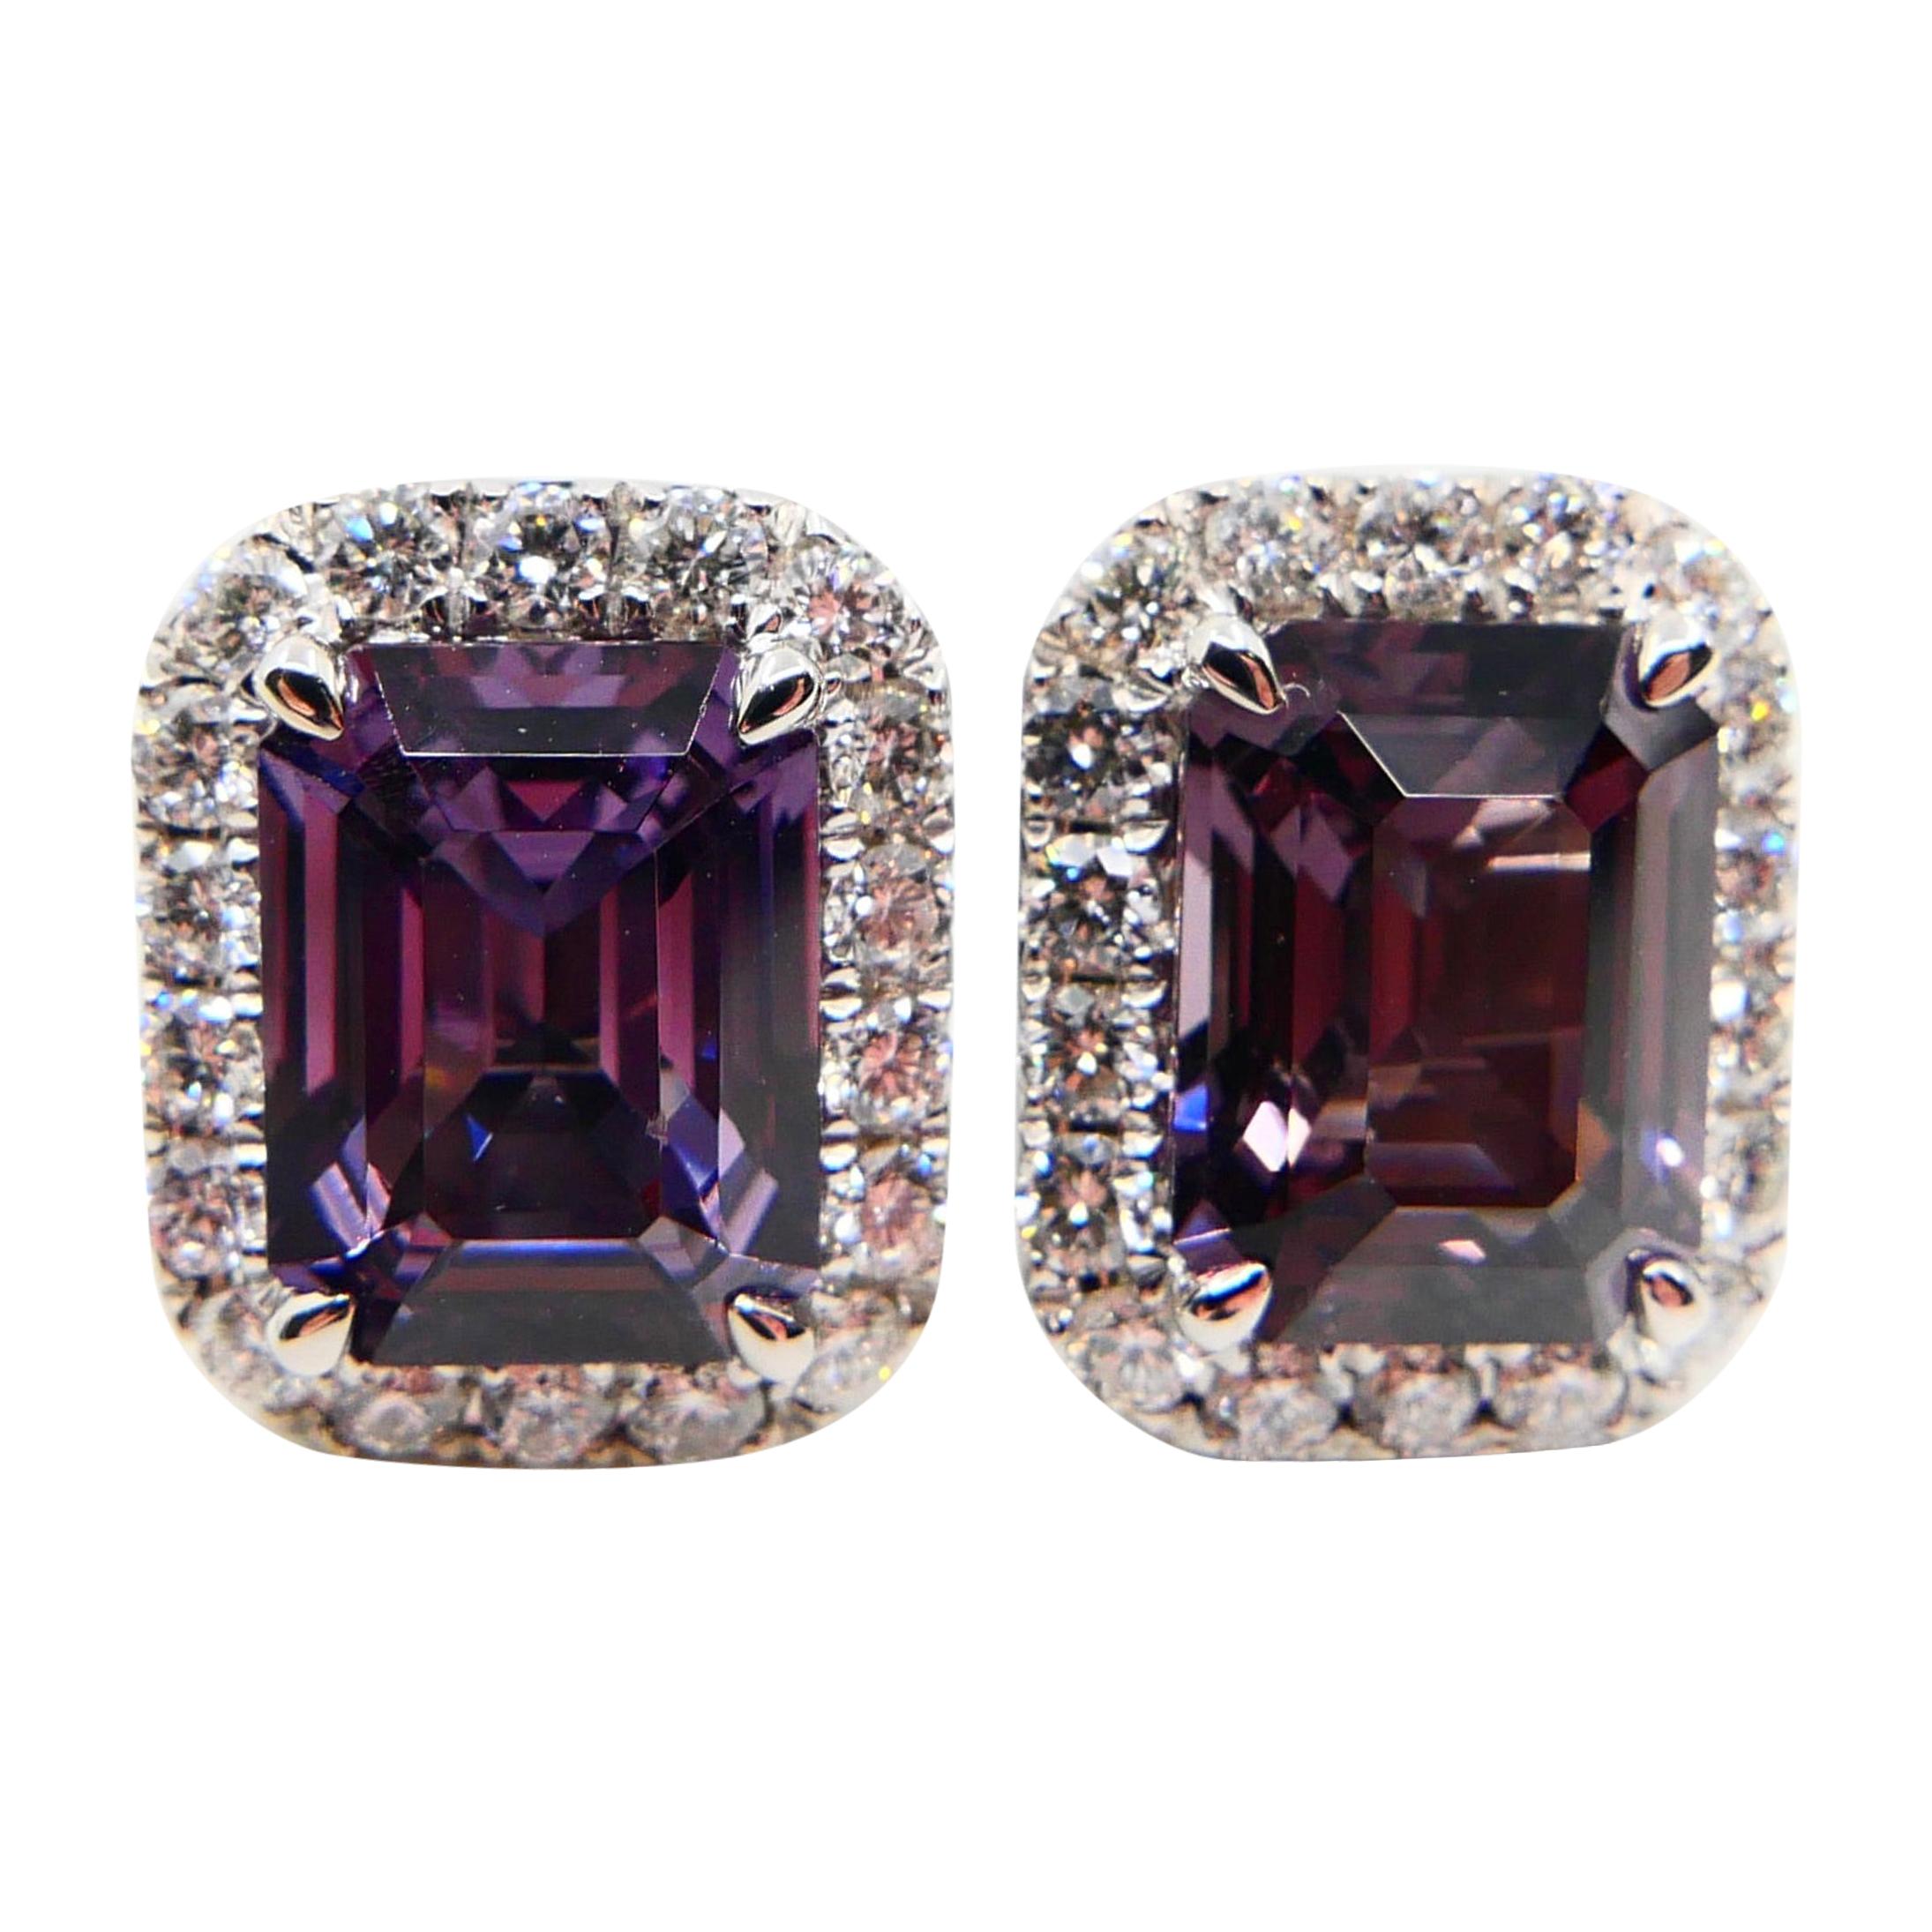 Natural 4.73 Carat Purple Step Cut Spinels and 0.67 Carat Diamond Earrings